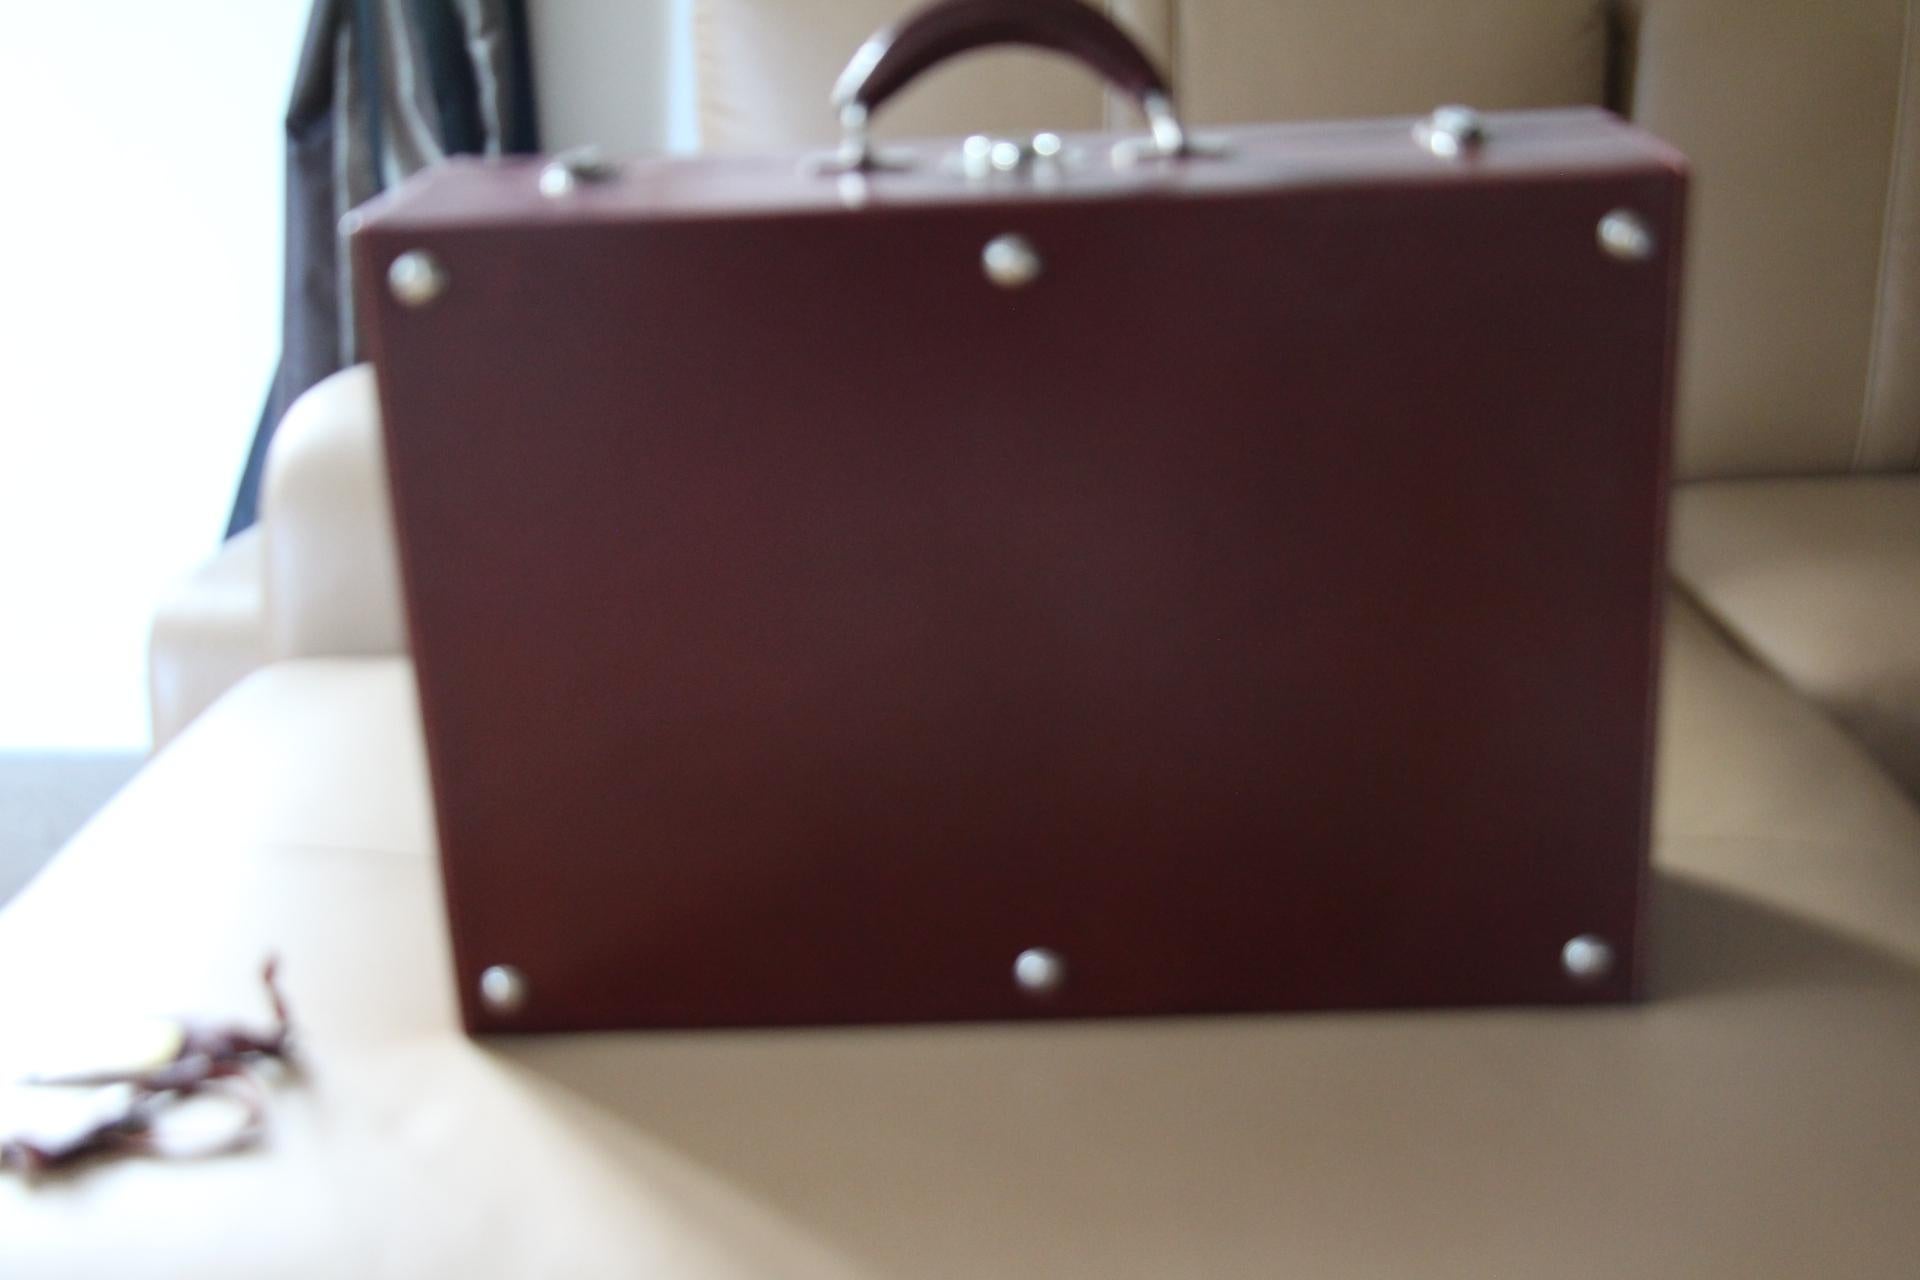 Red Leather Hermes Suitcase 53 cm, Hermes Trunk, Hermes Luggage 3